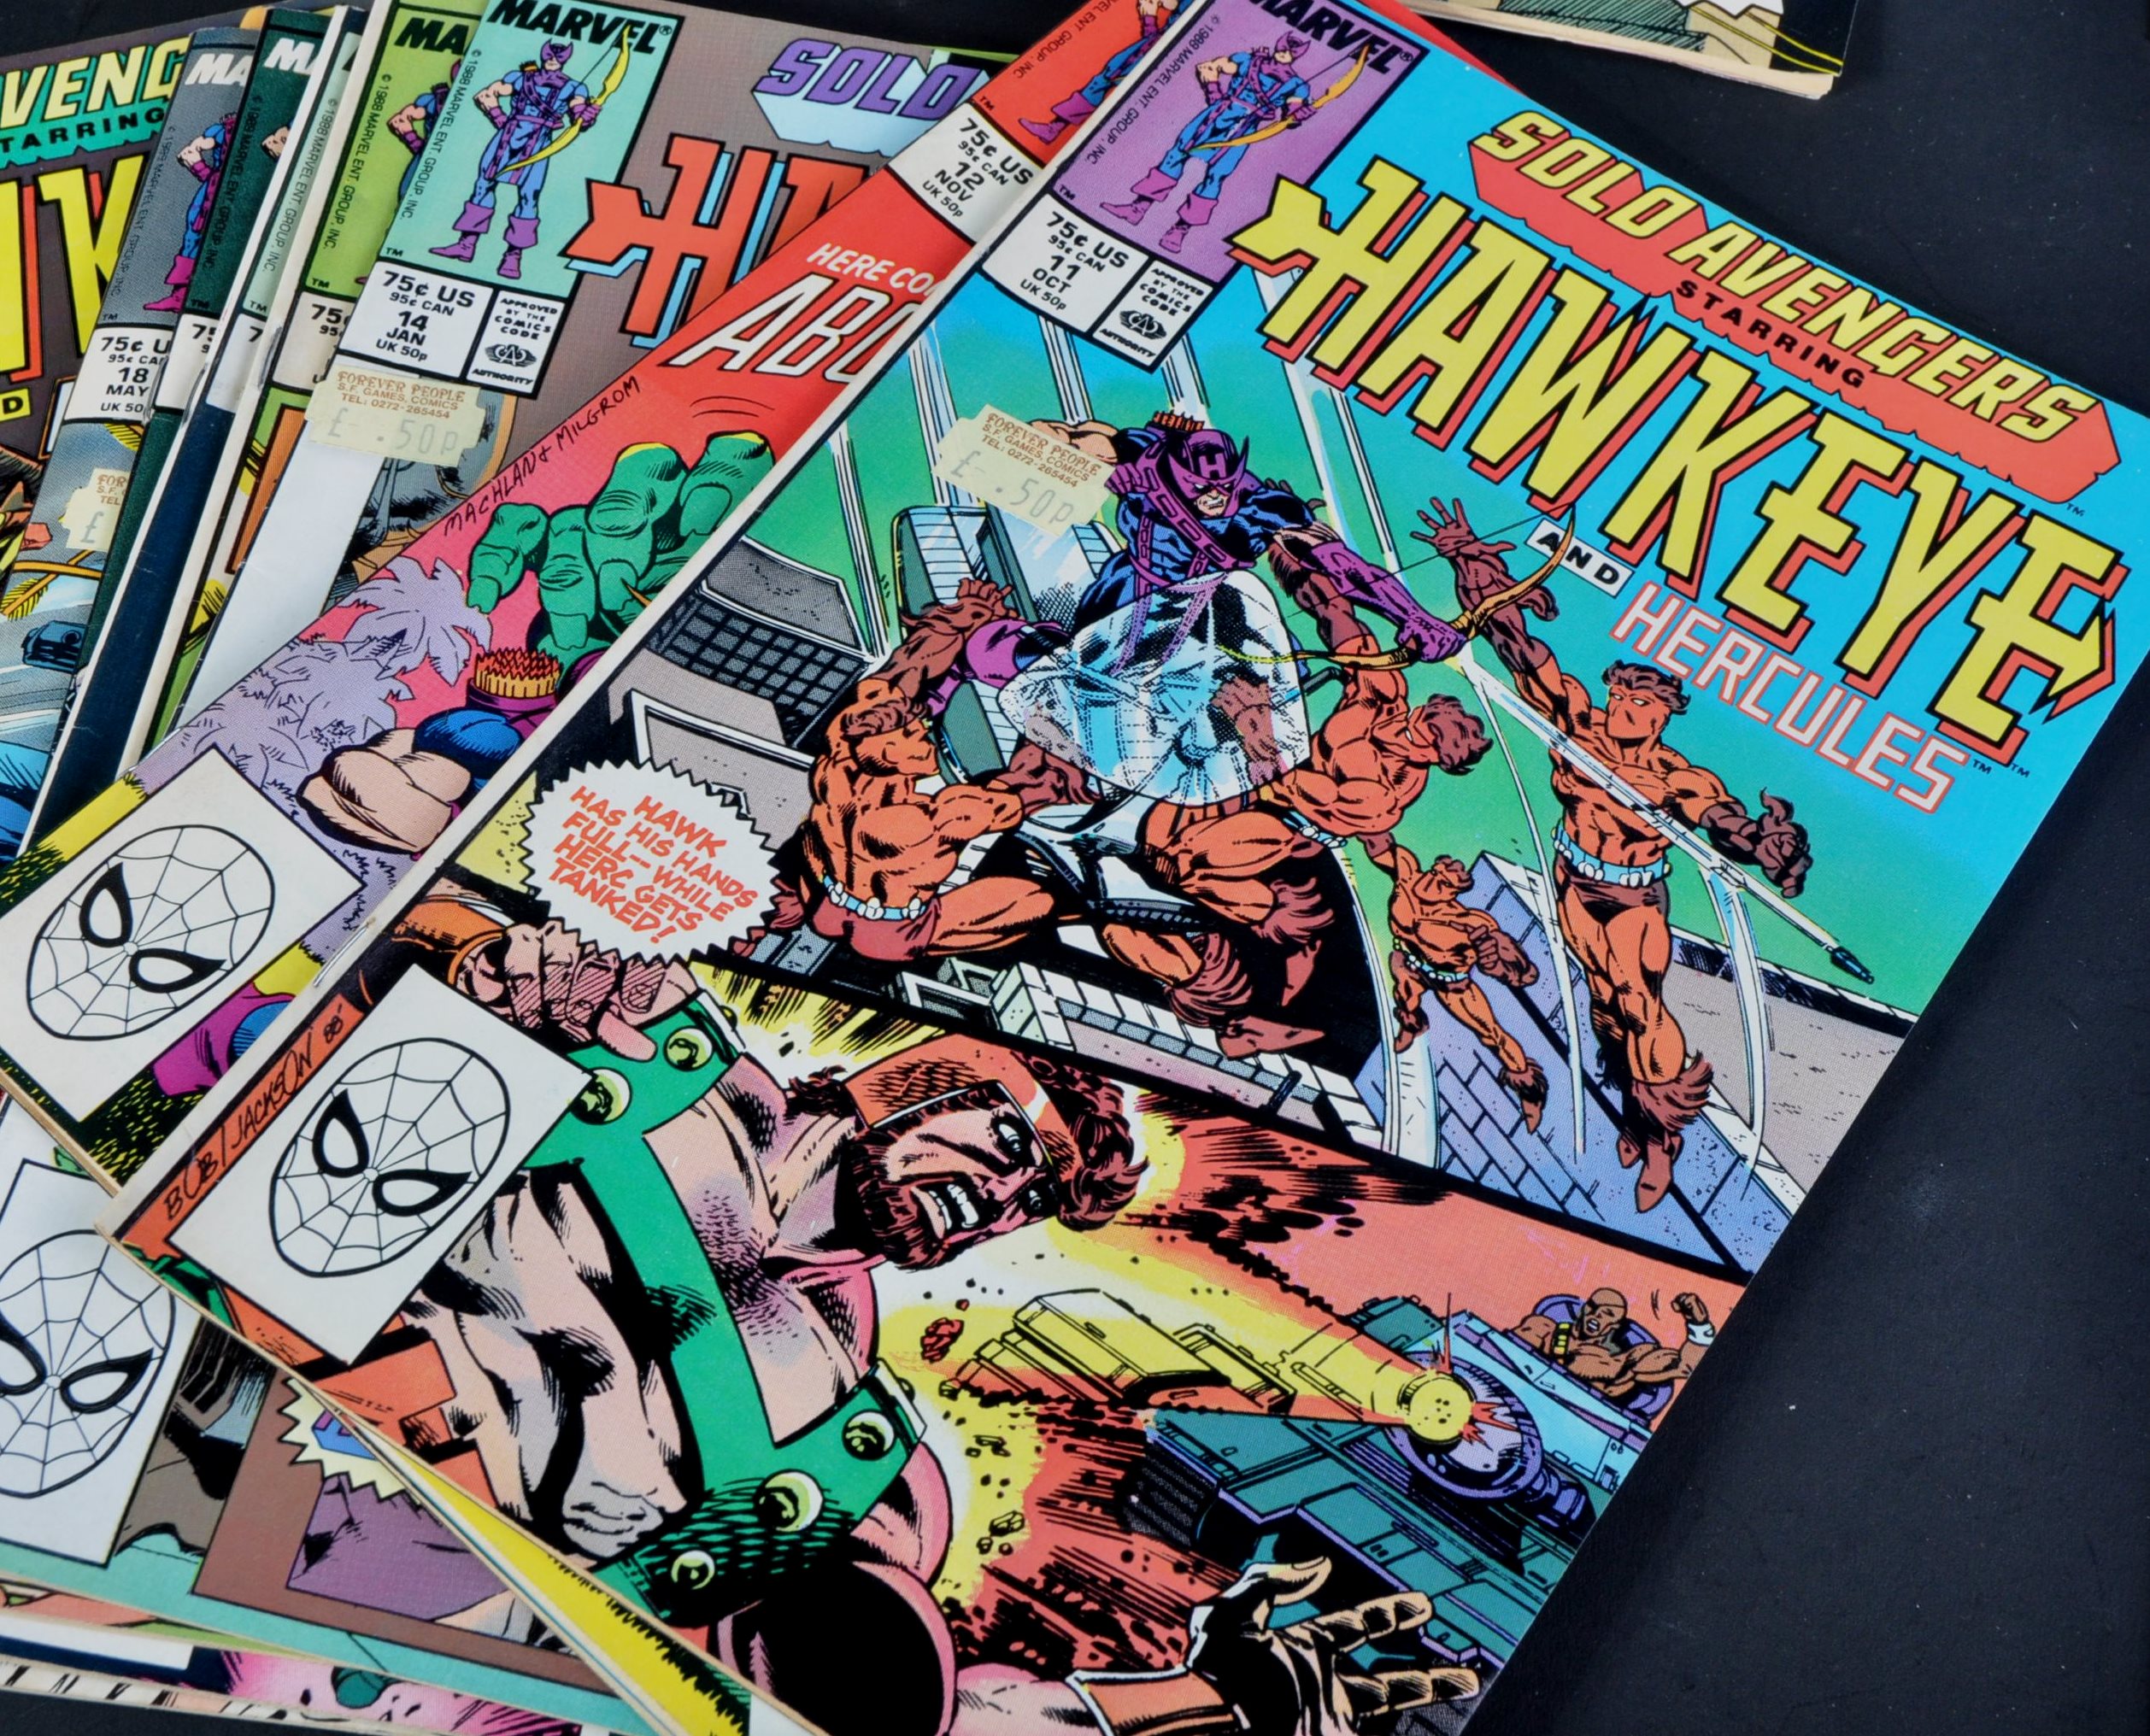 MARVEL COMICS - HAWKEYE - COLLECTION OF VINTAGE COMIC BOOKS - Image 6 of 9